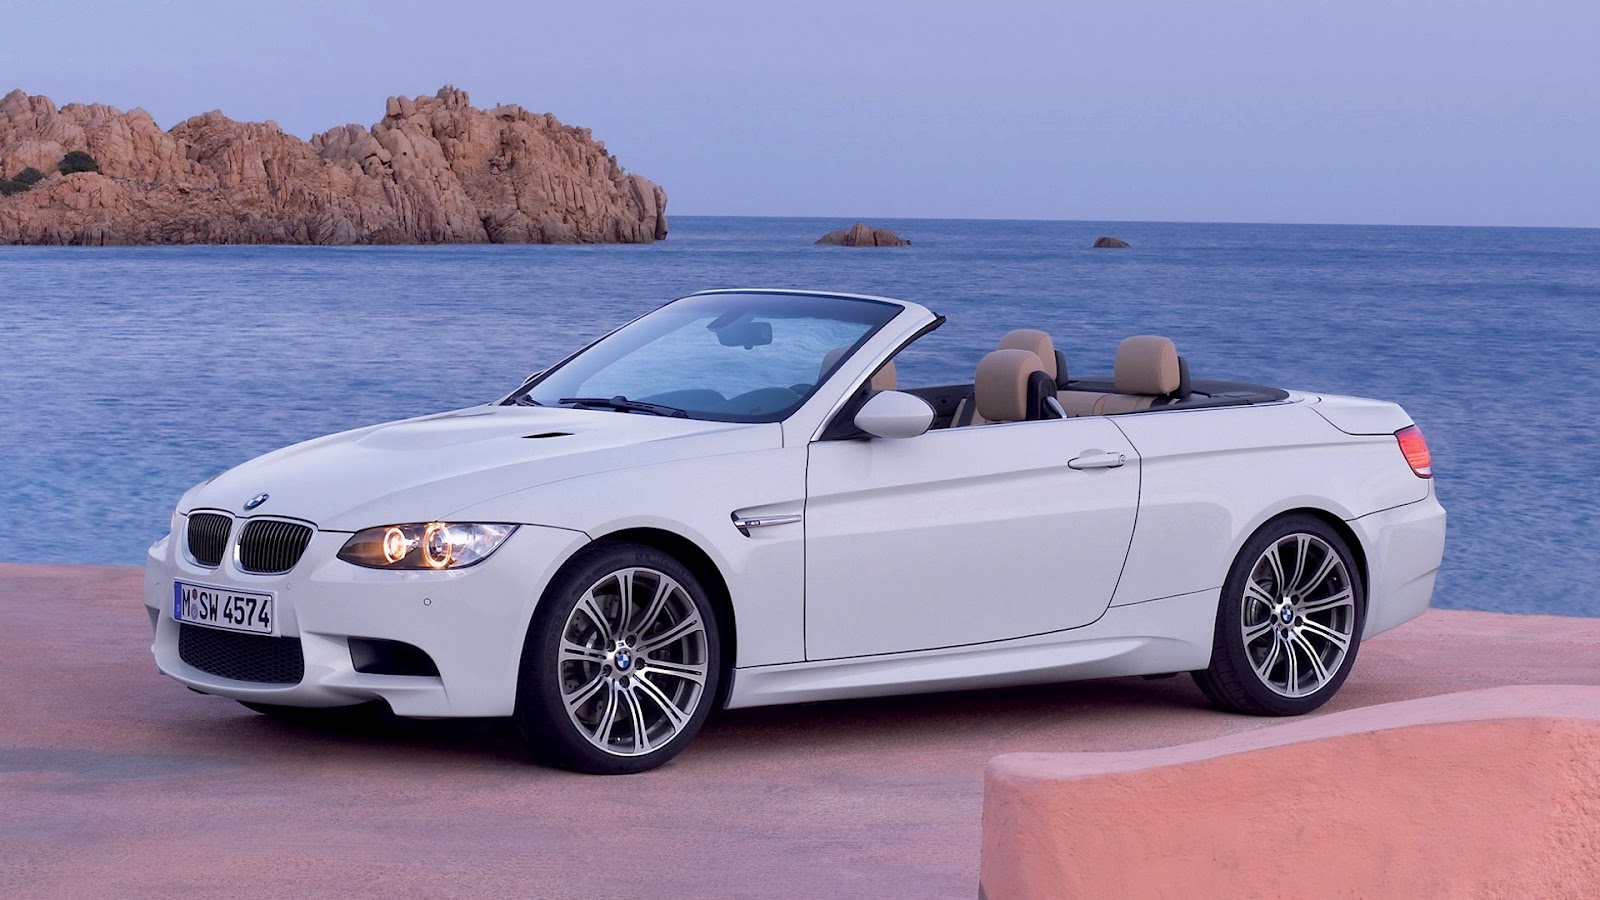 BMW Car Wallpapers HD | Nice Wallpapers